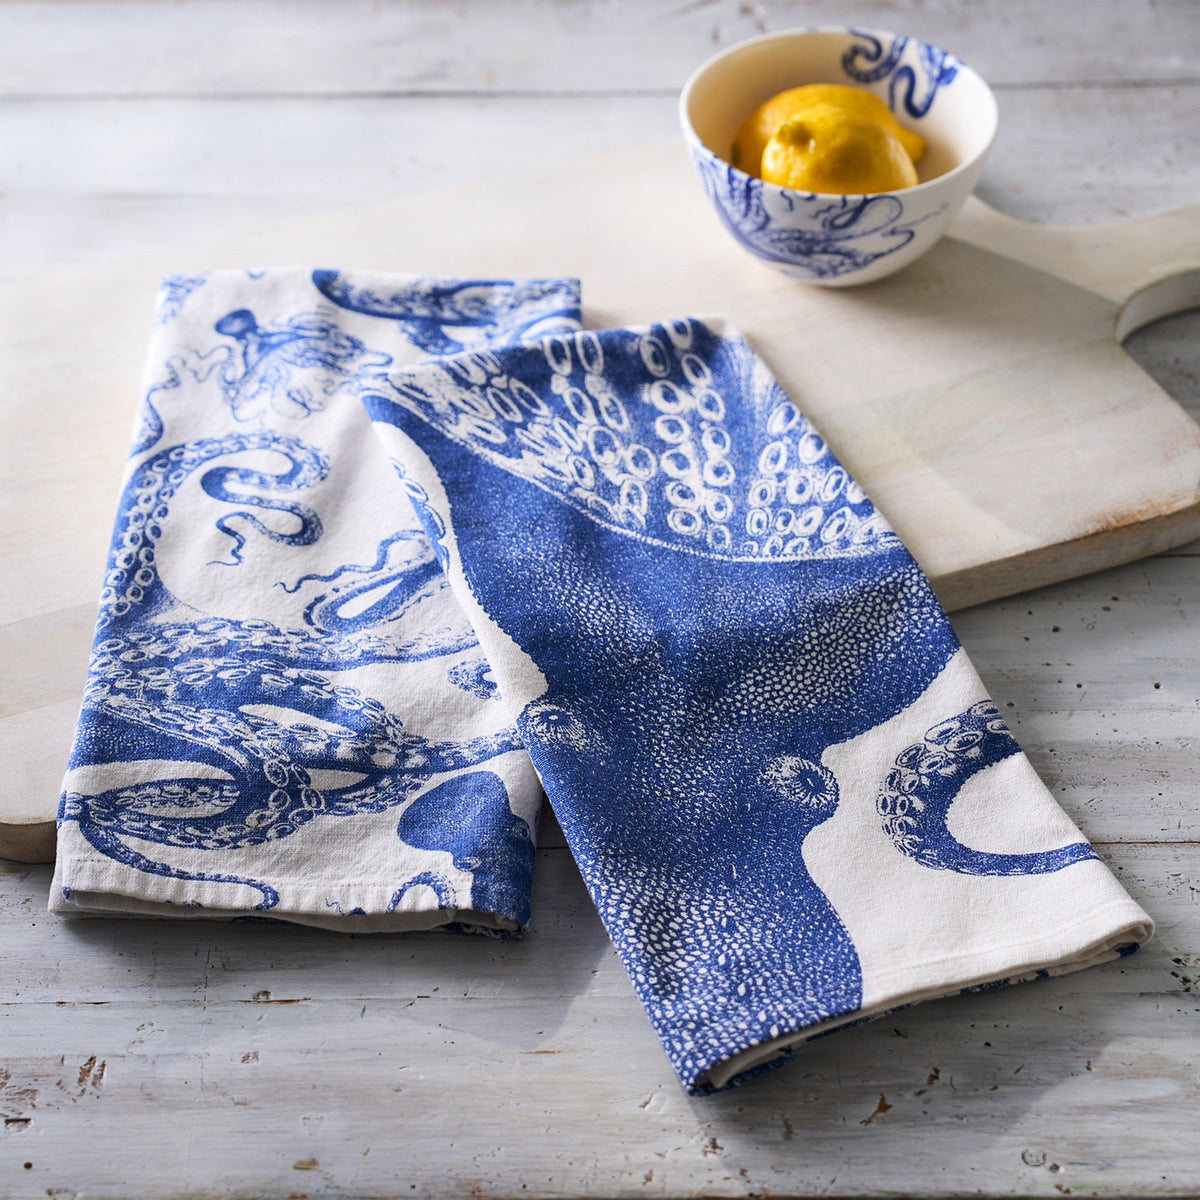 Two Lucy Kitchen Towels Set/2 by Caskata, seafaring whimsy blue and white octopus tea towels made from 100% cotton on a cutting board.